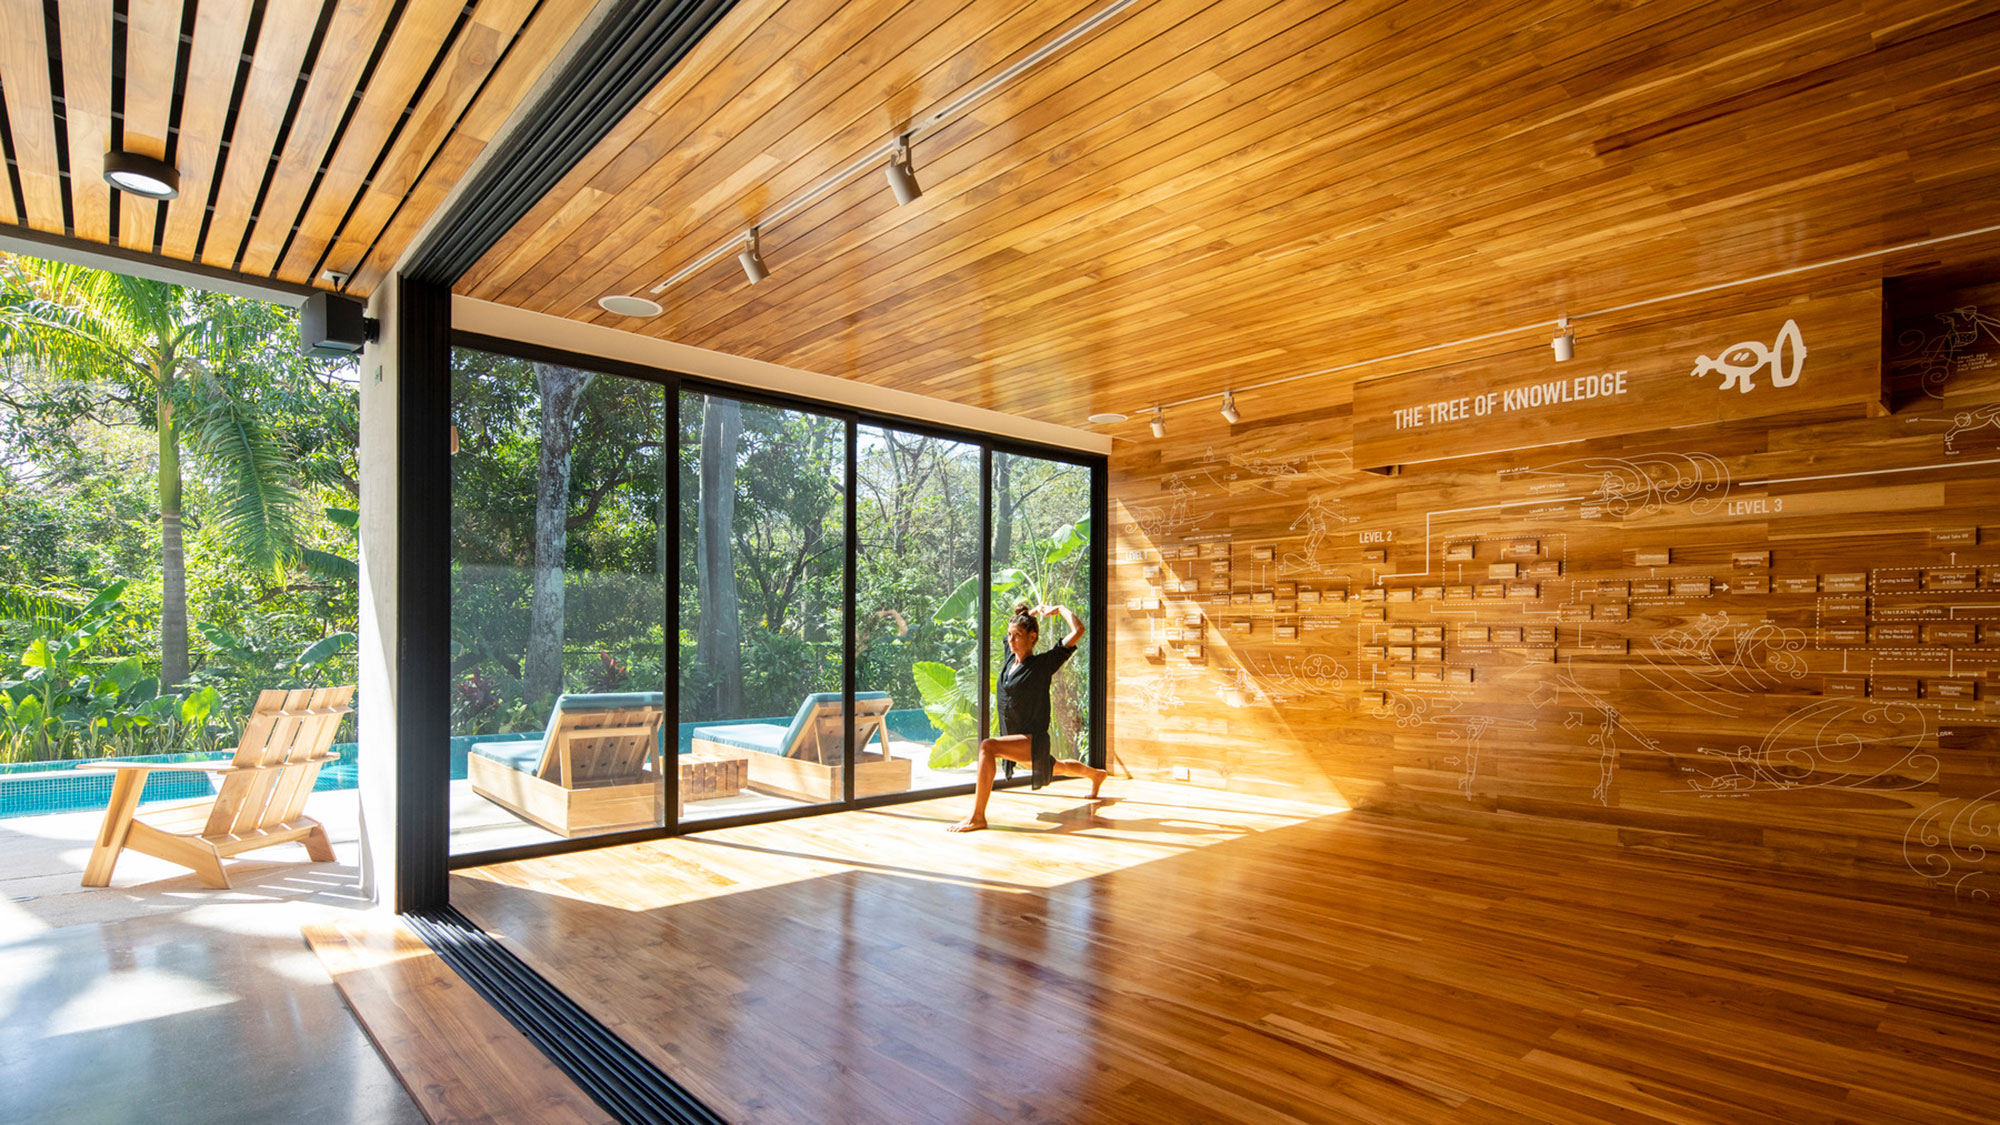 A room with a wood floor and a glass wall with a person standing in it.